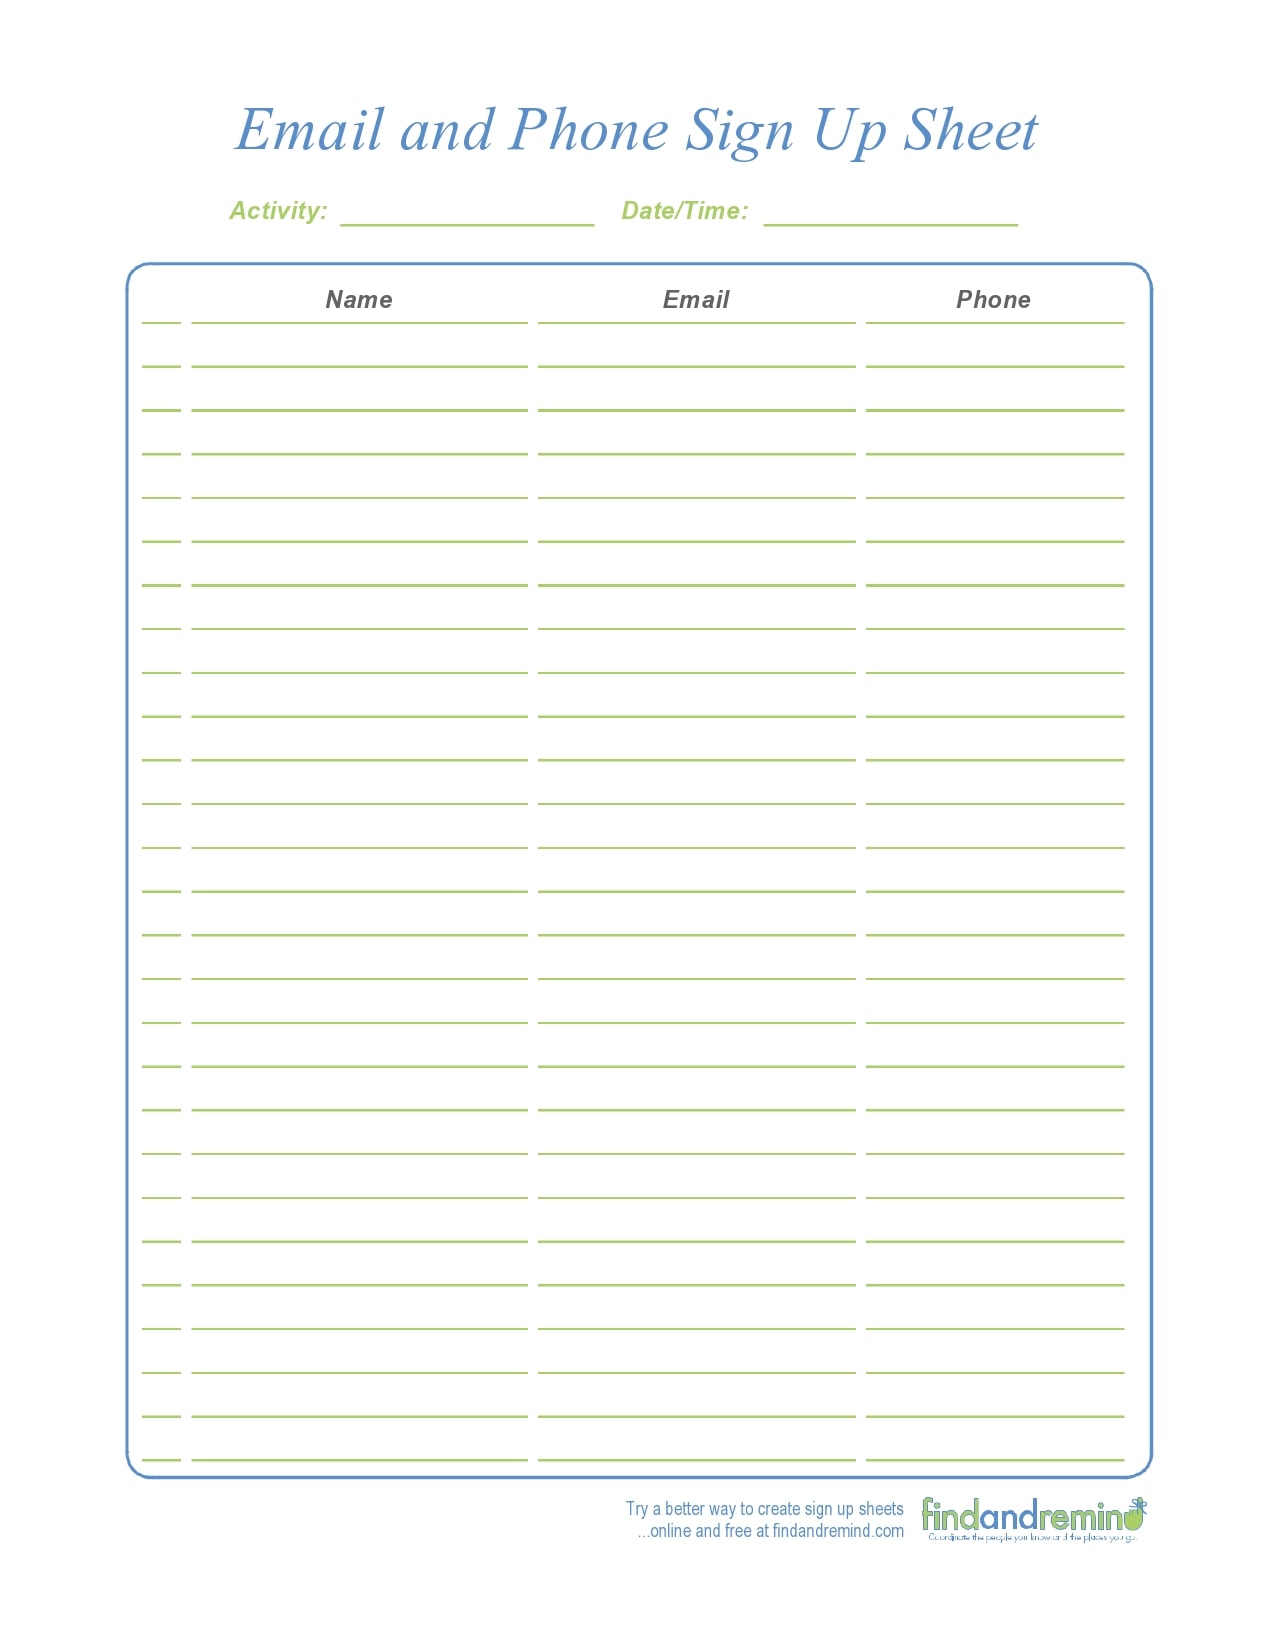 printable-email-sign-up-sheet-template-printable-templates